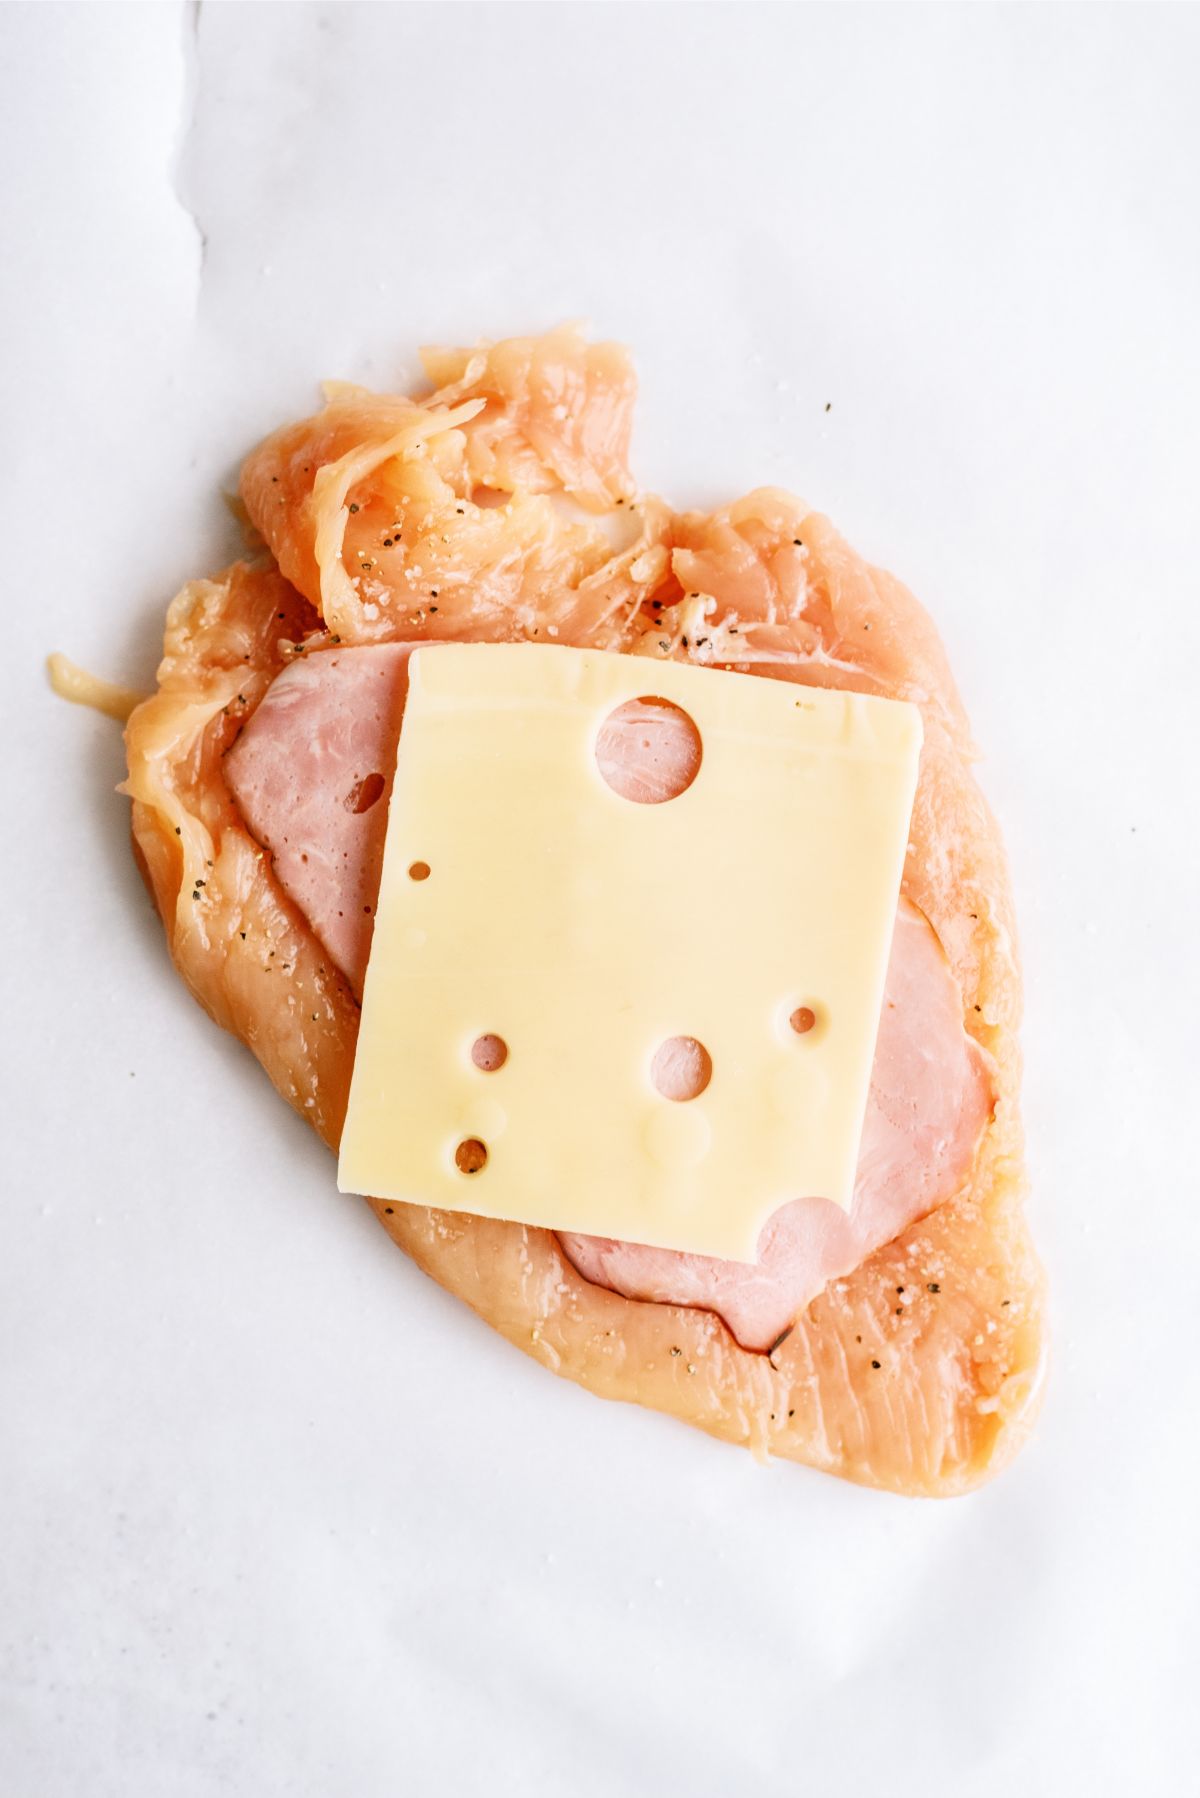 Slice of ham and a slice of cheese on top of a flattened chicken breast